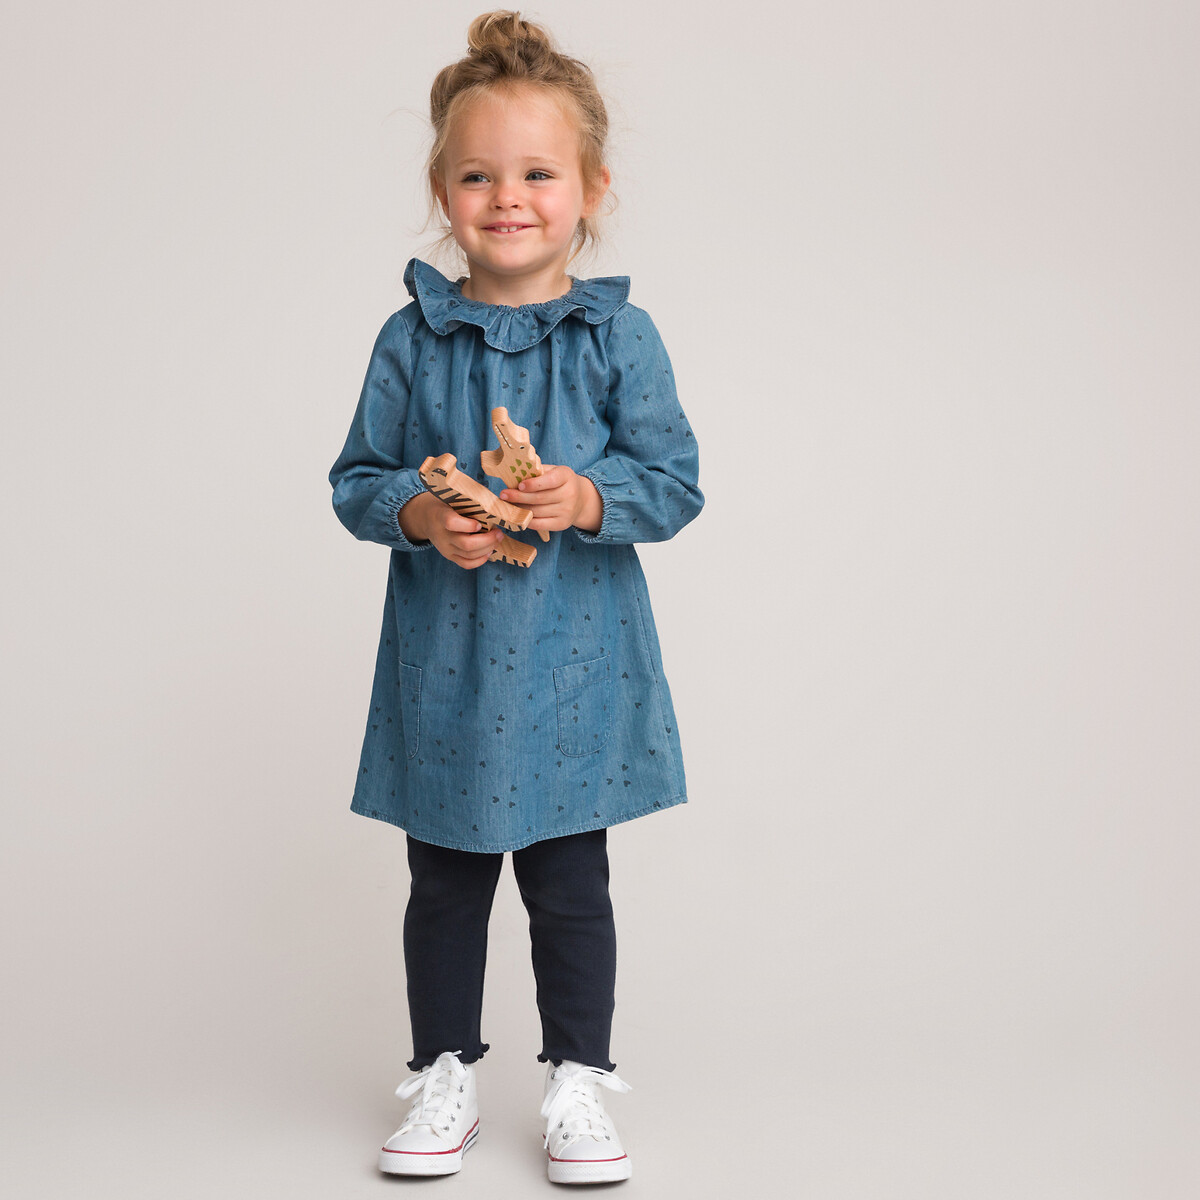 Ribbed Cotton Leggings/Denim Tunic Dress Outfit